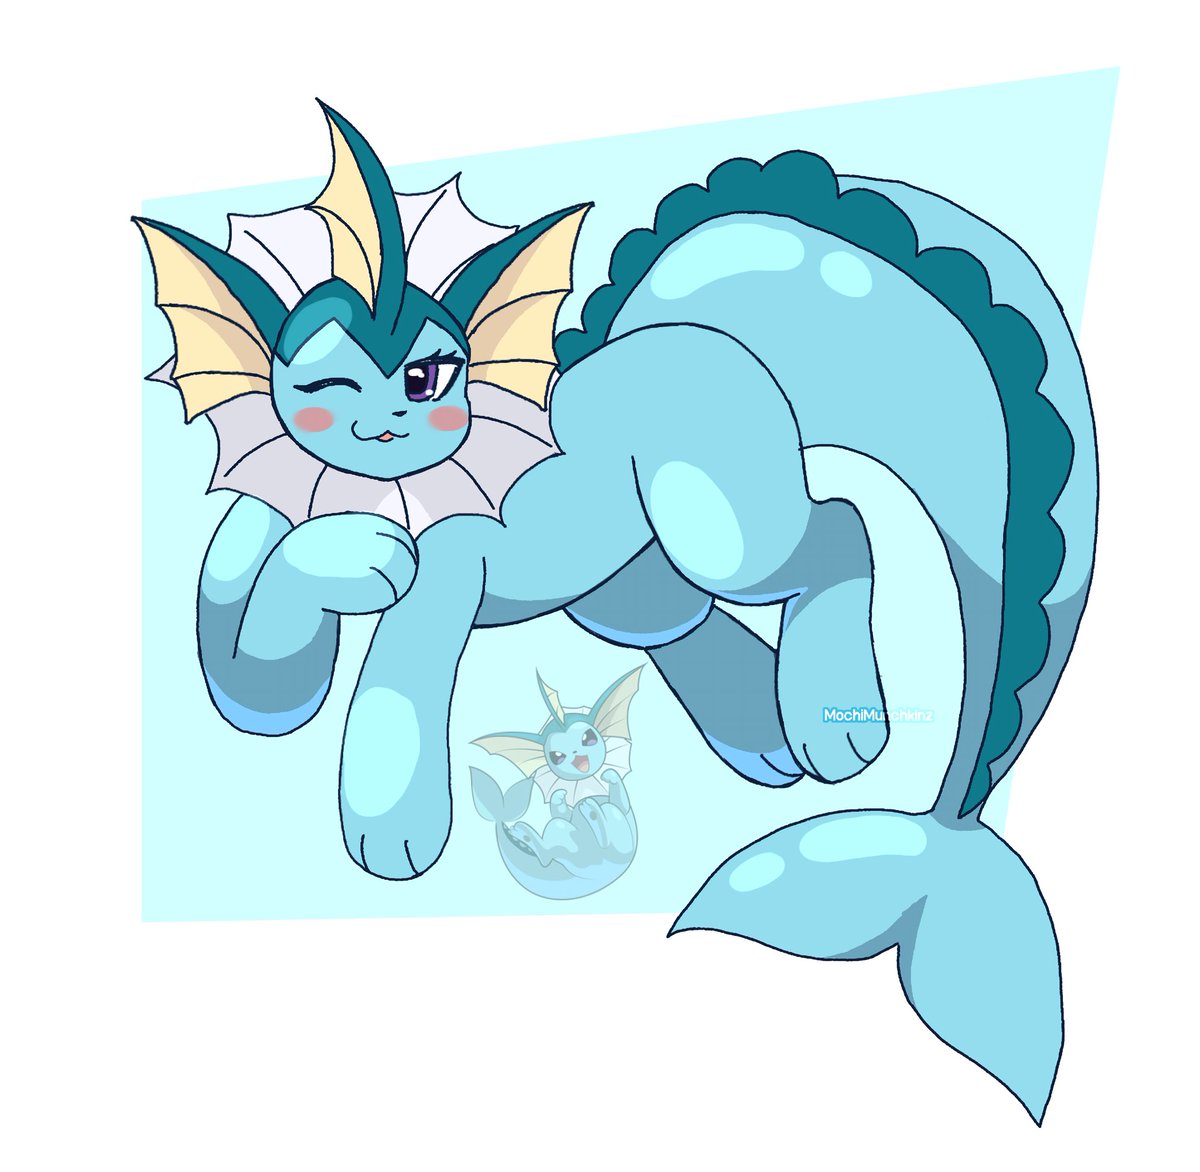 My first attempt at drawing Vaporeon 
(Never drew them before)